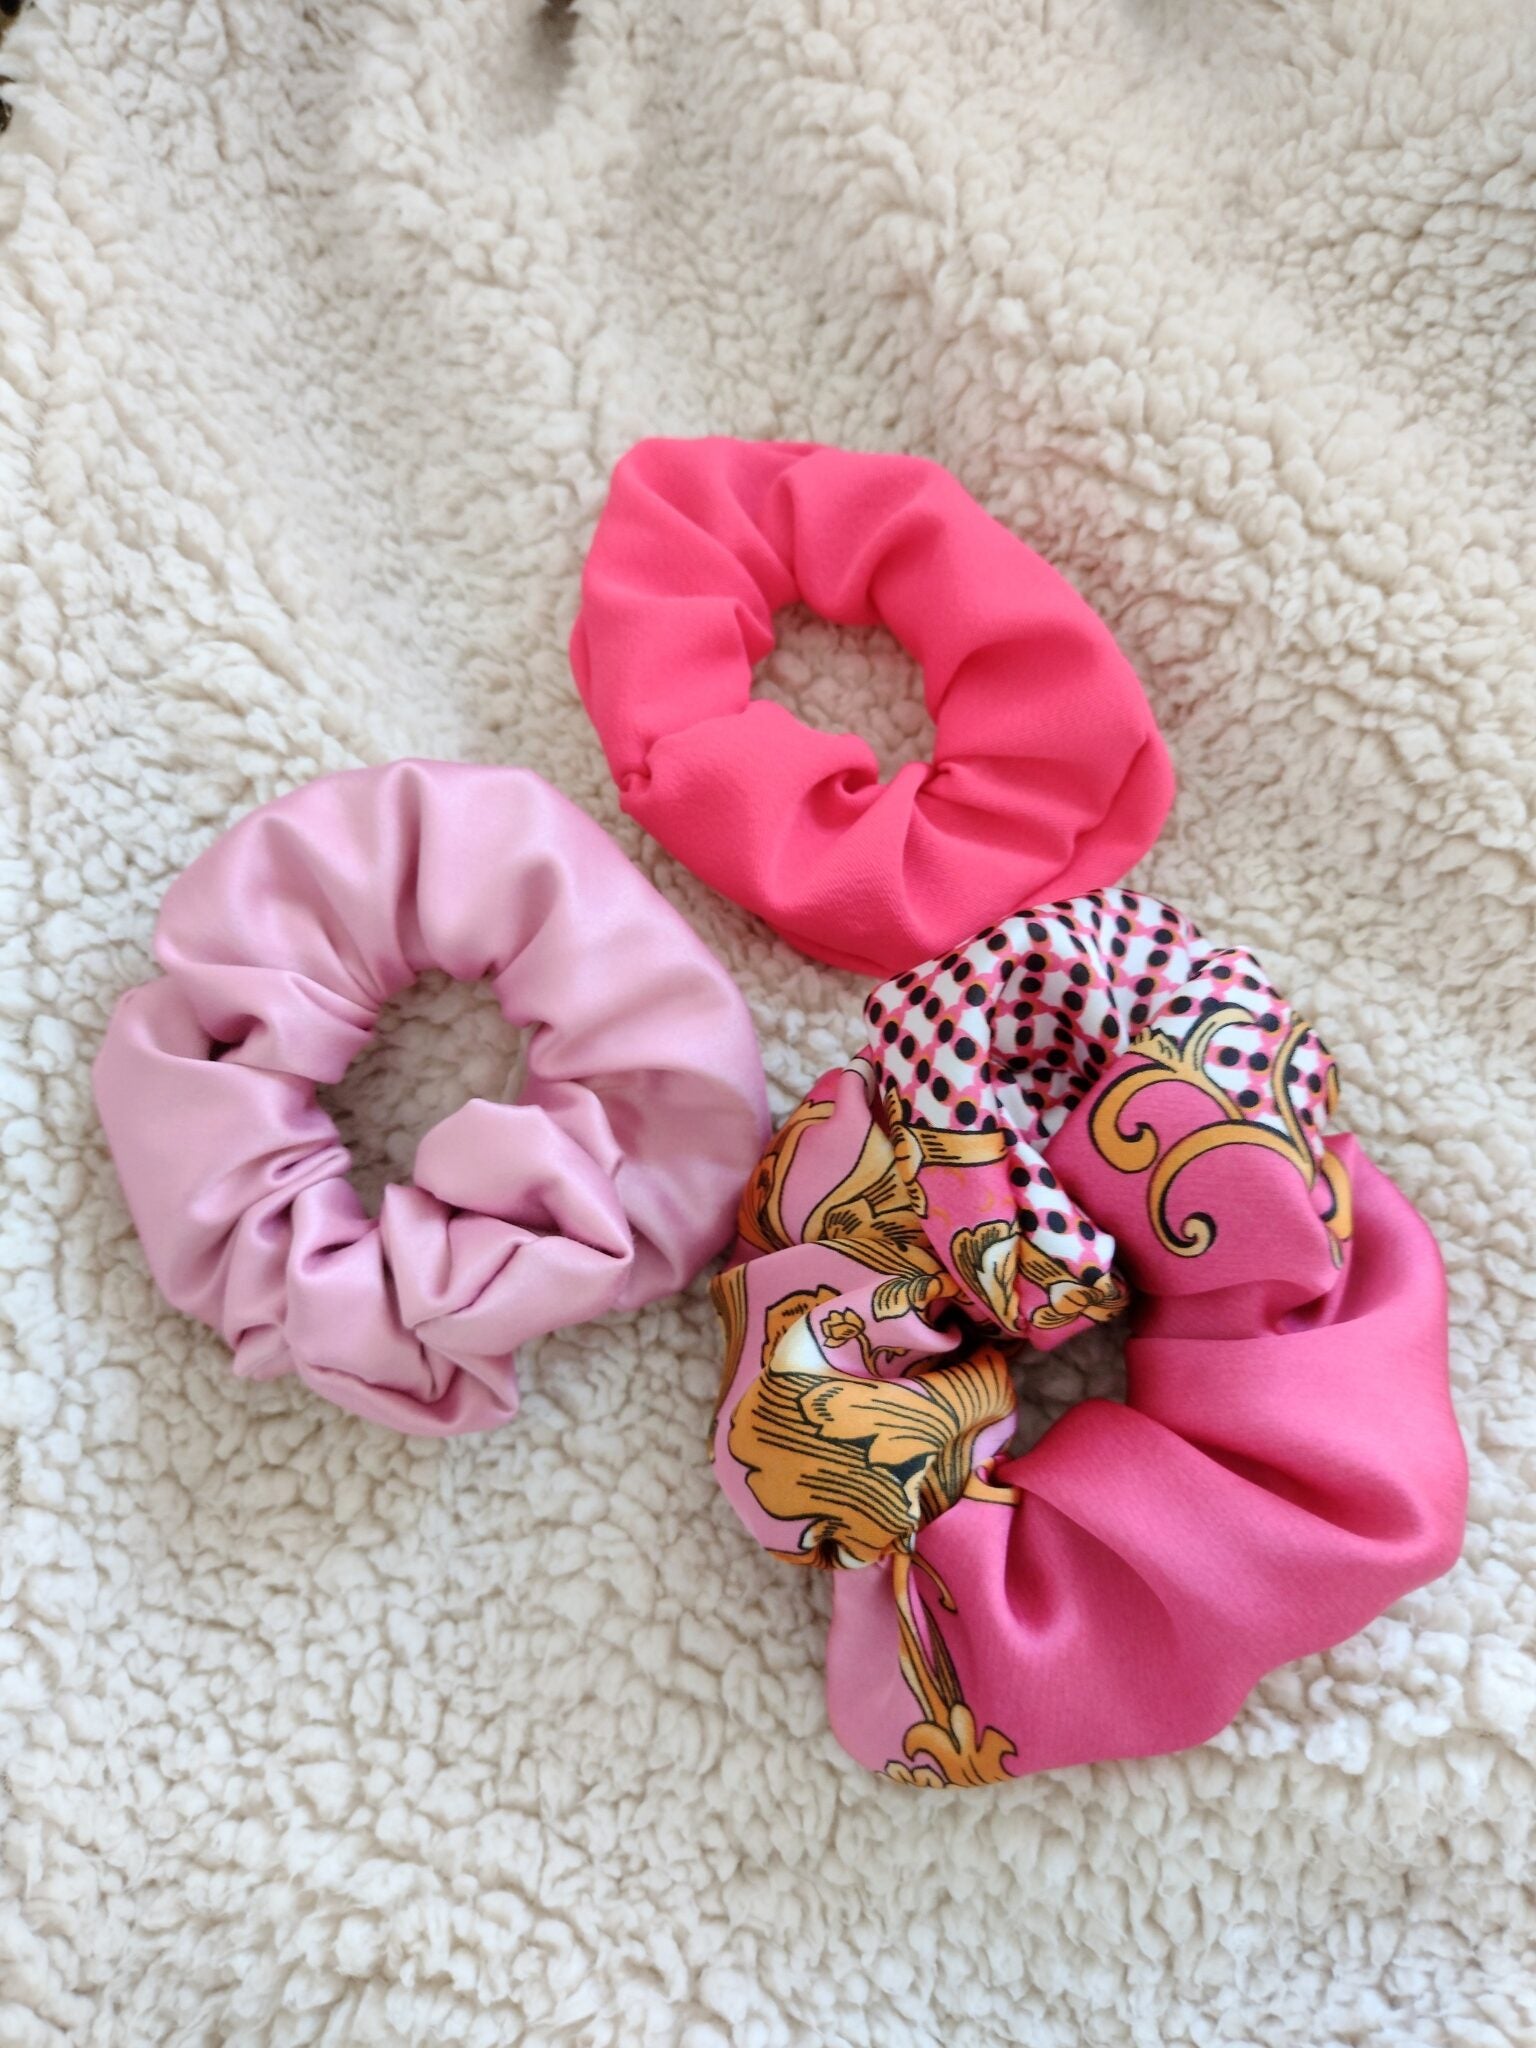 8 Ways to Wear a Scrunchie in 2022 and Beyond